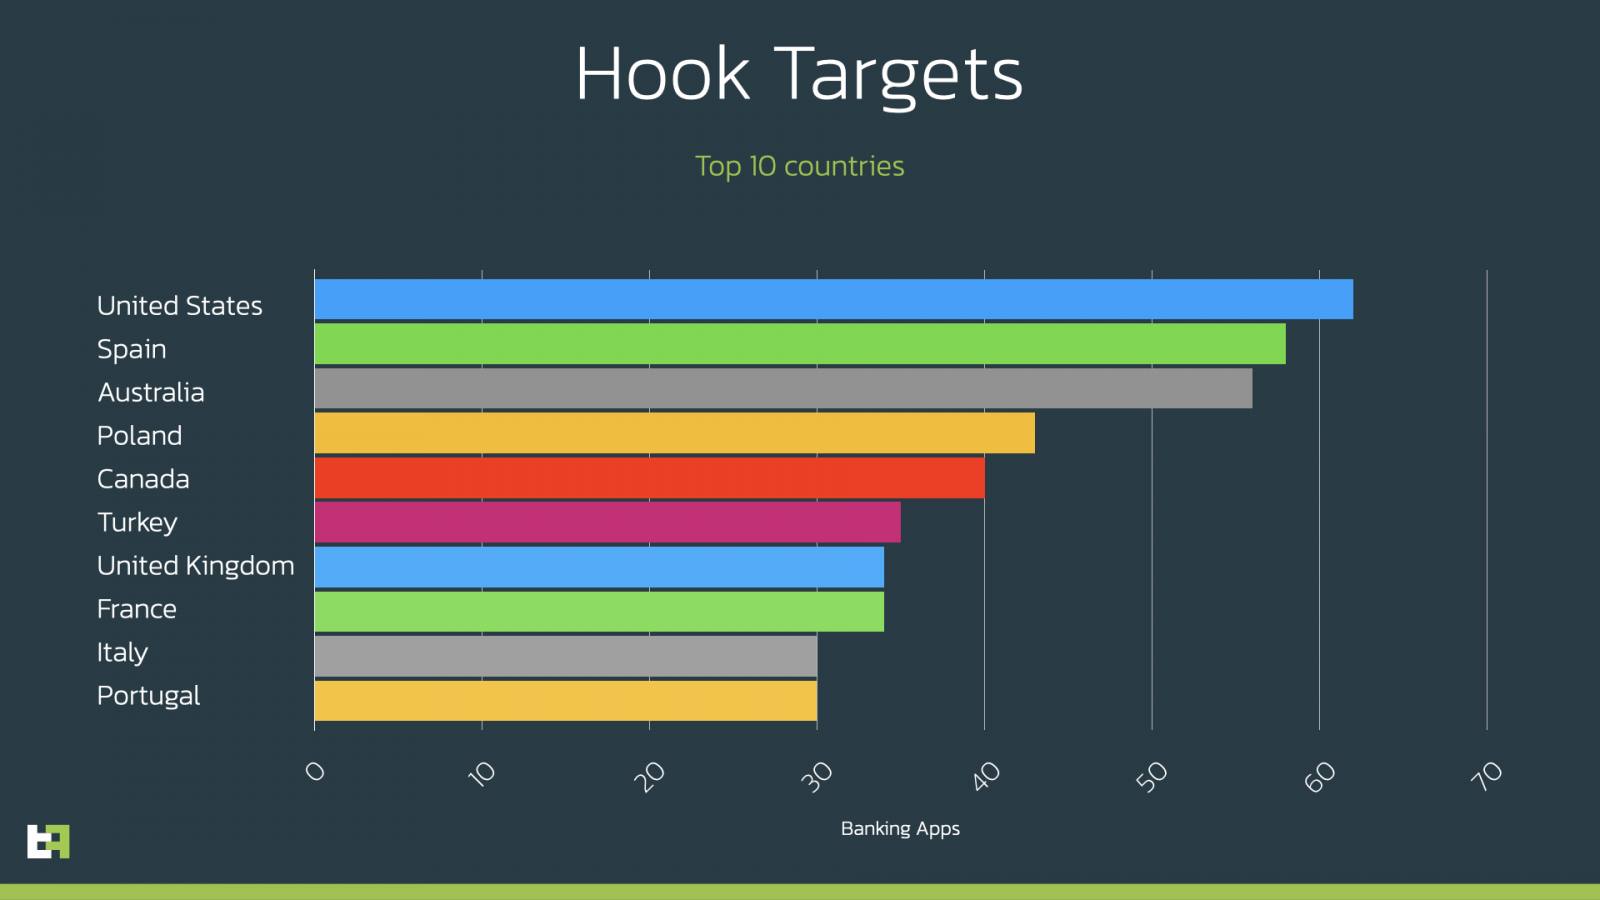 The number of banking apps that Hook is targeting per country